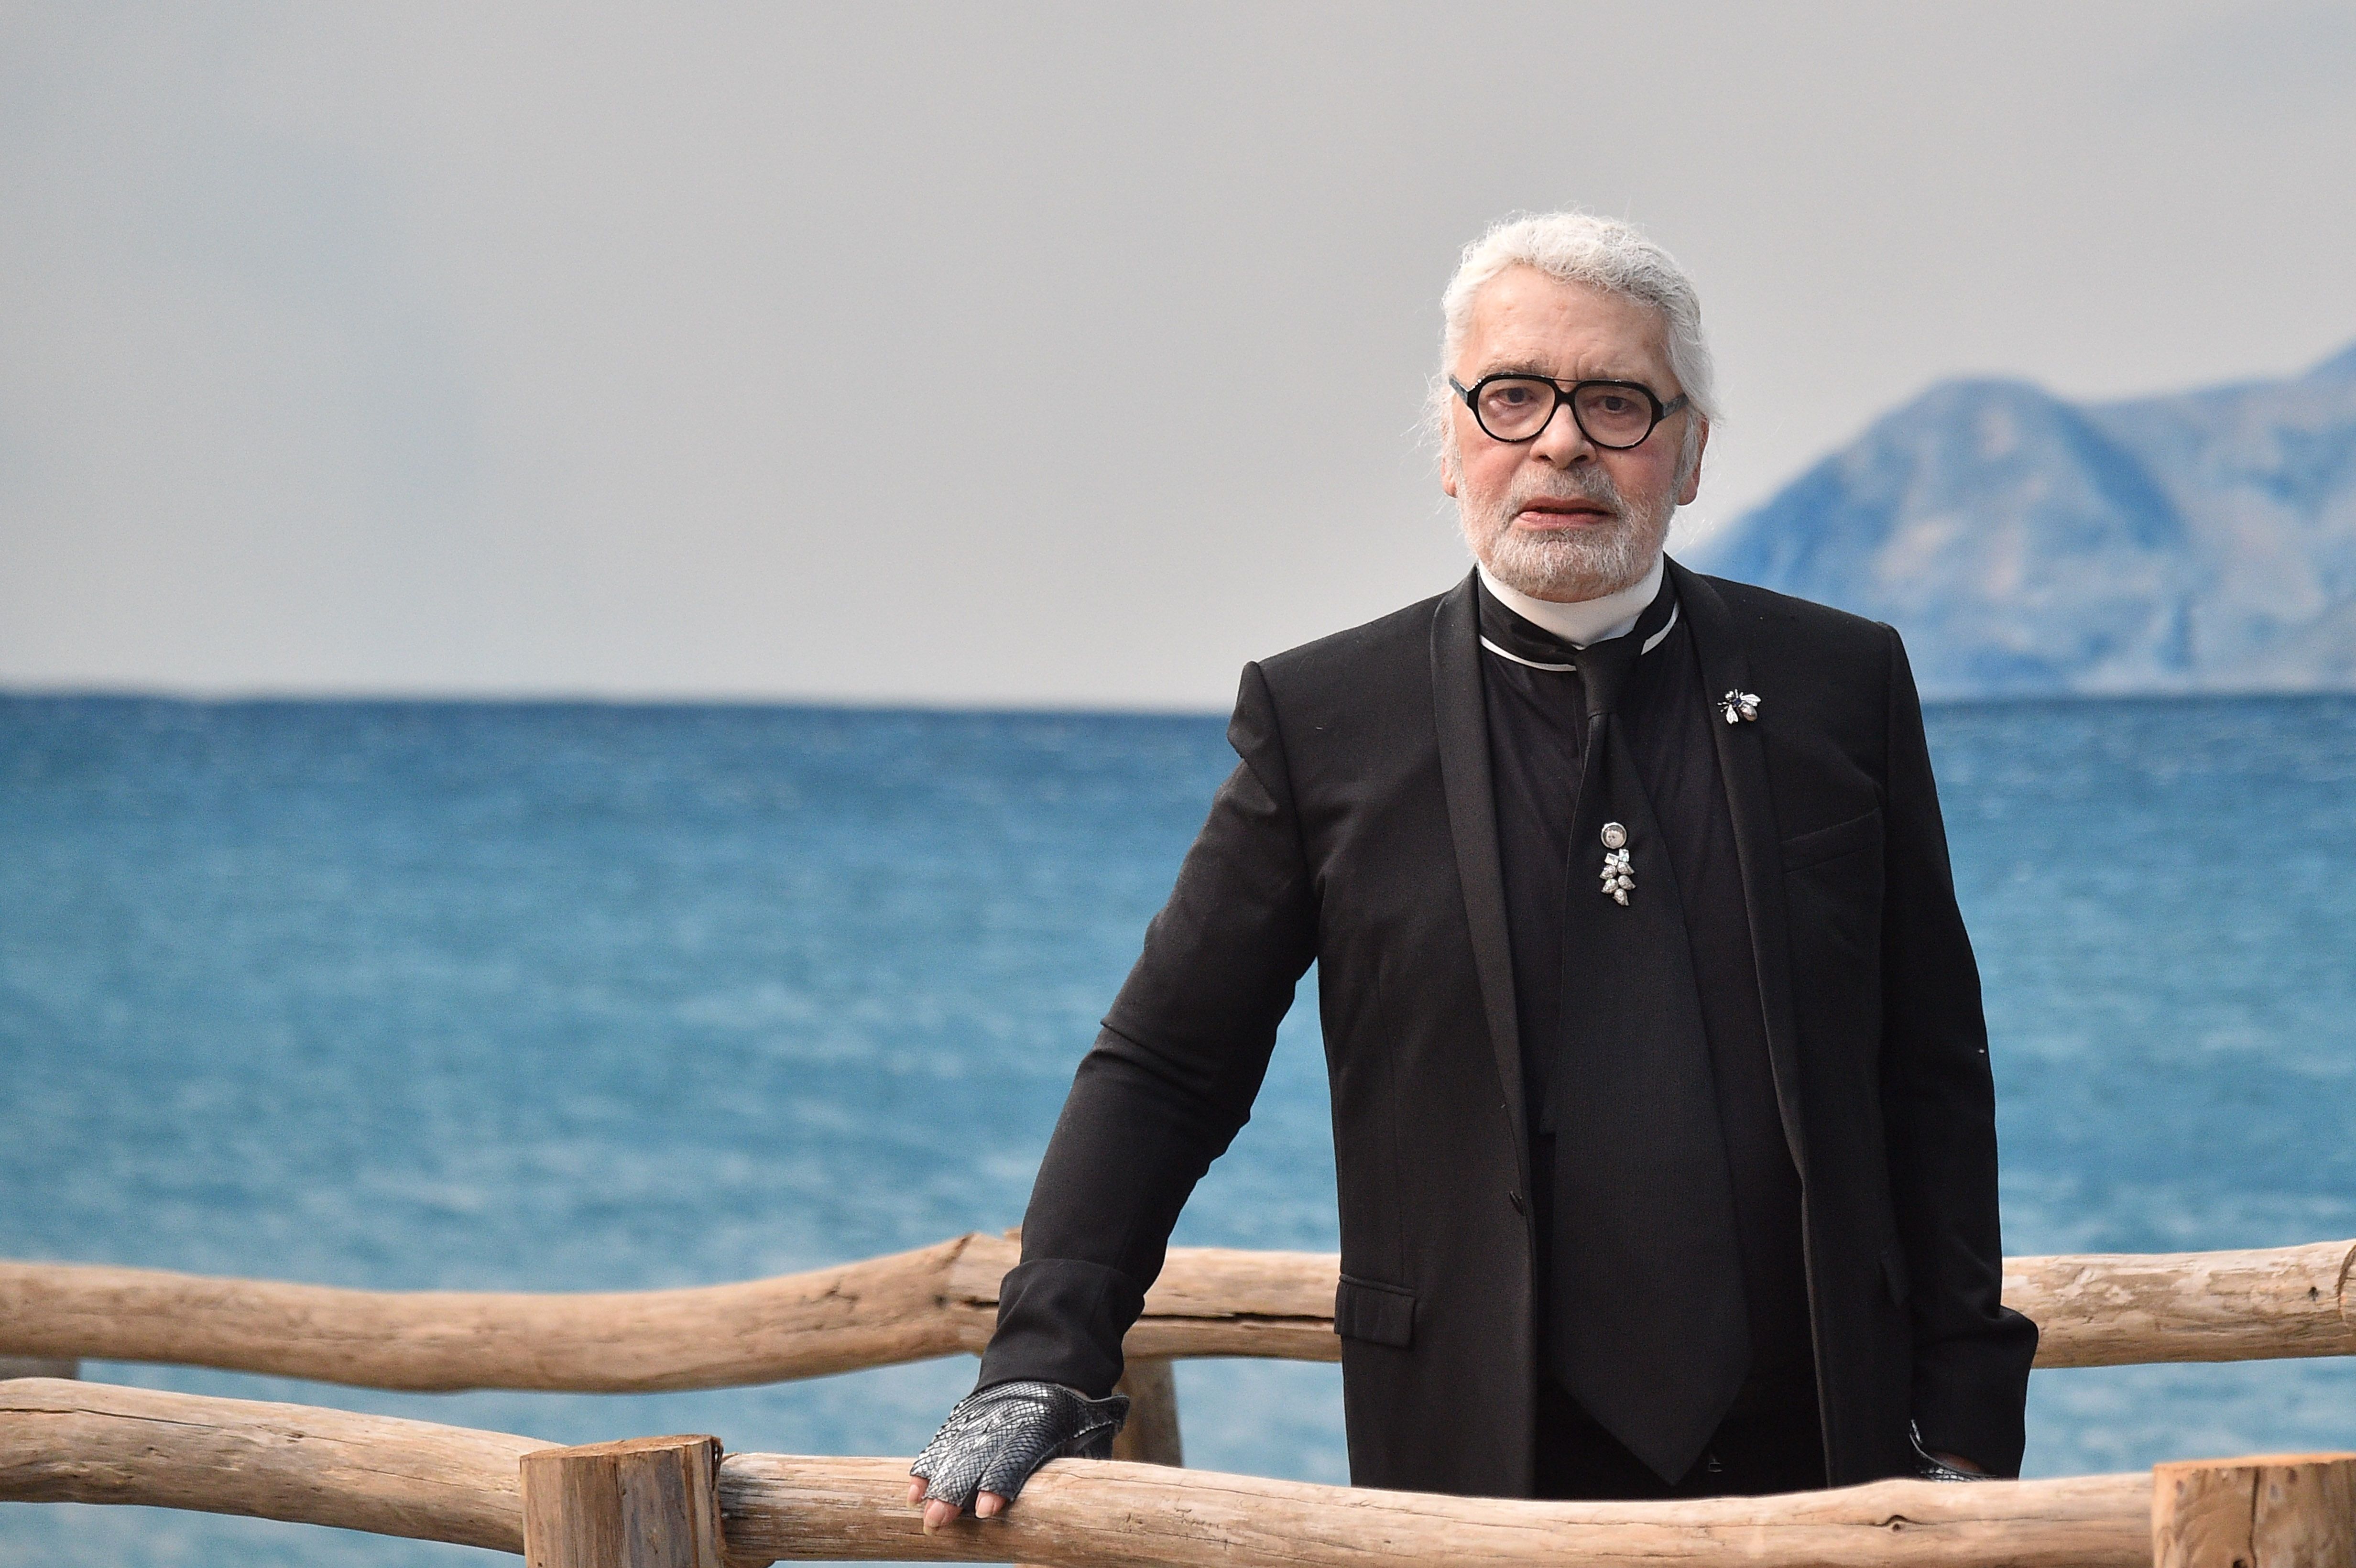 Karl Lagerfeld, Iconic Chanel Designer, is Dead at 85 - Frenchly